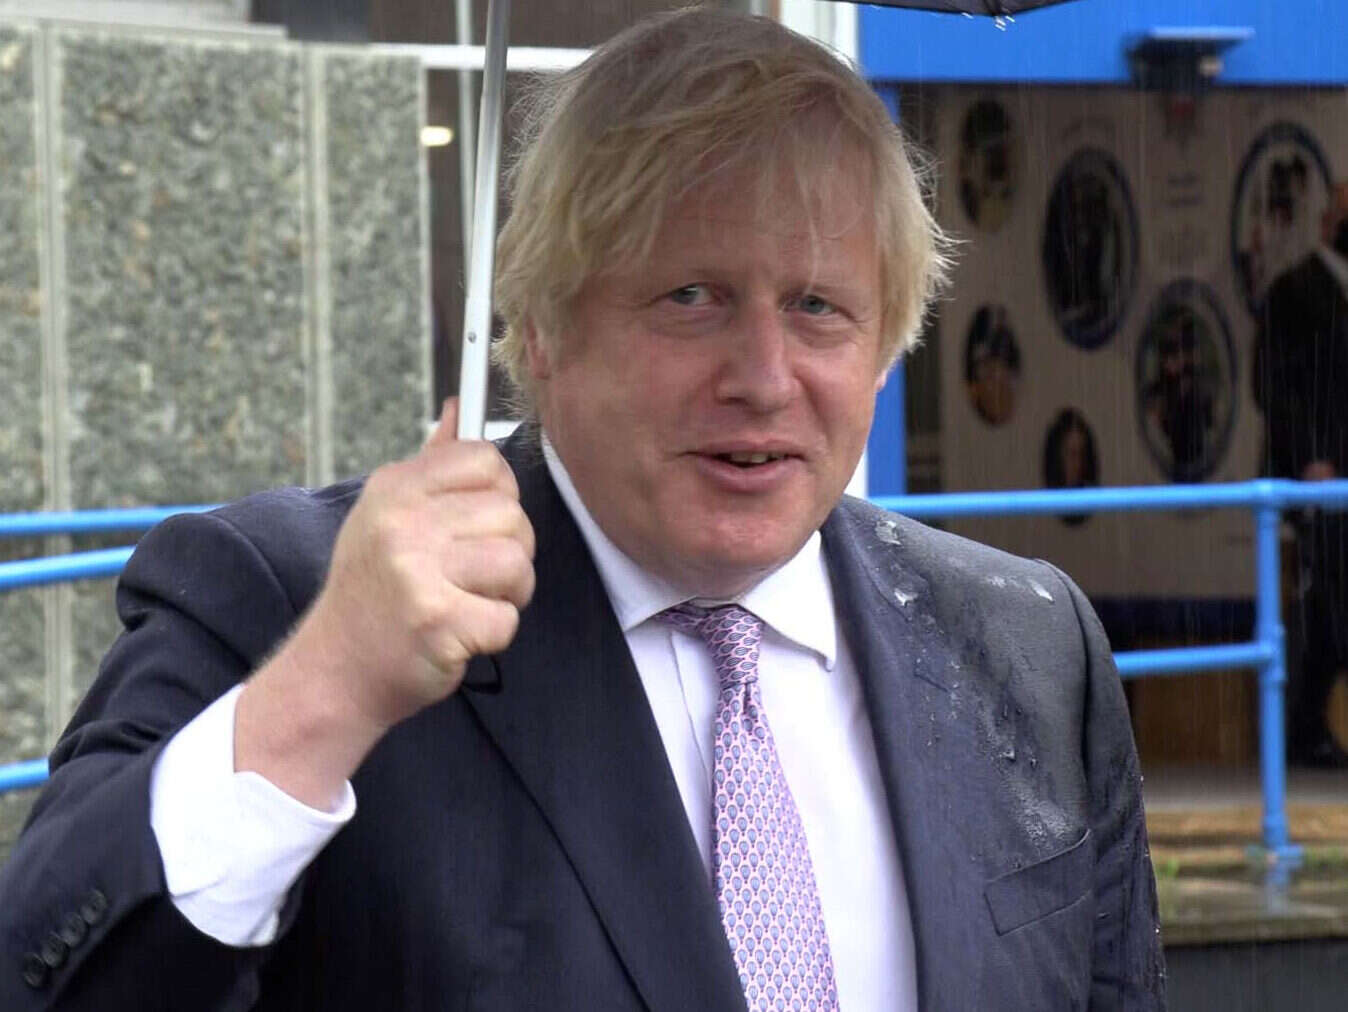 Boris Johnson says he does not want journalists prosecuted for public interest work under Official Secrets Acts reforms